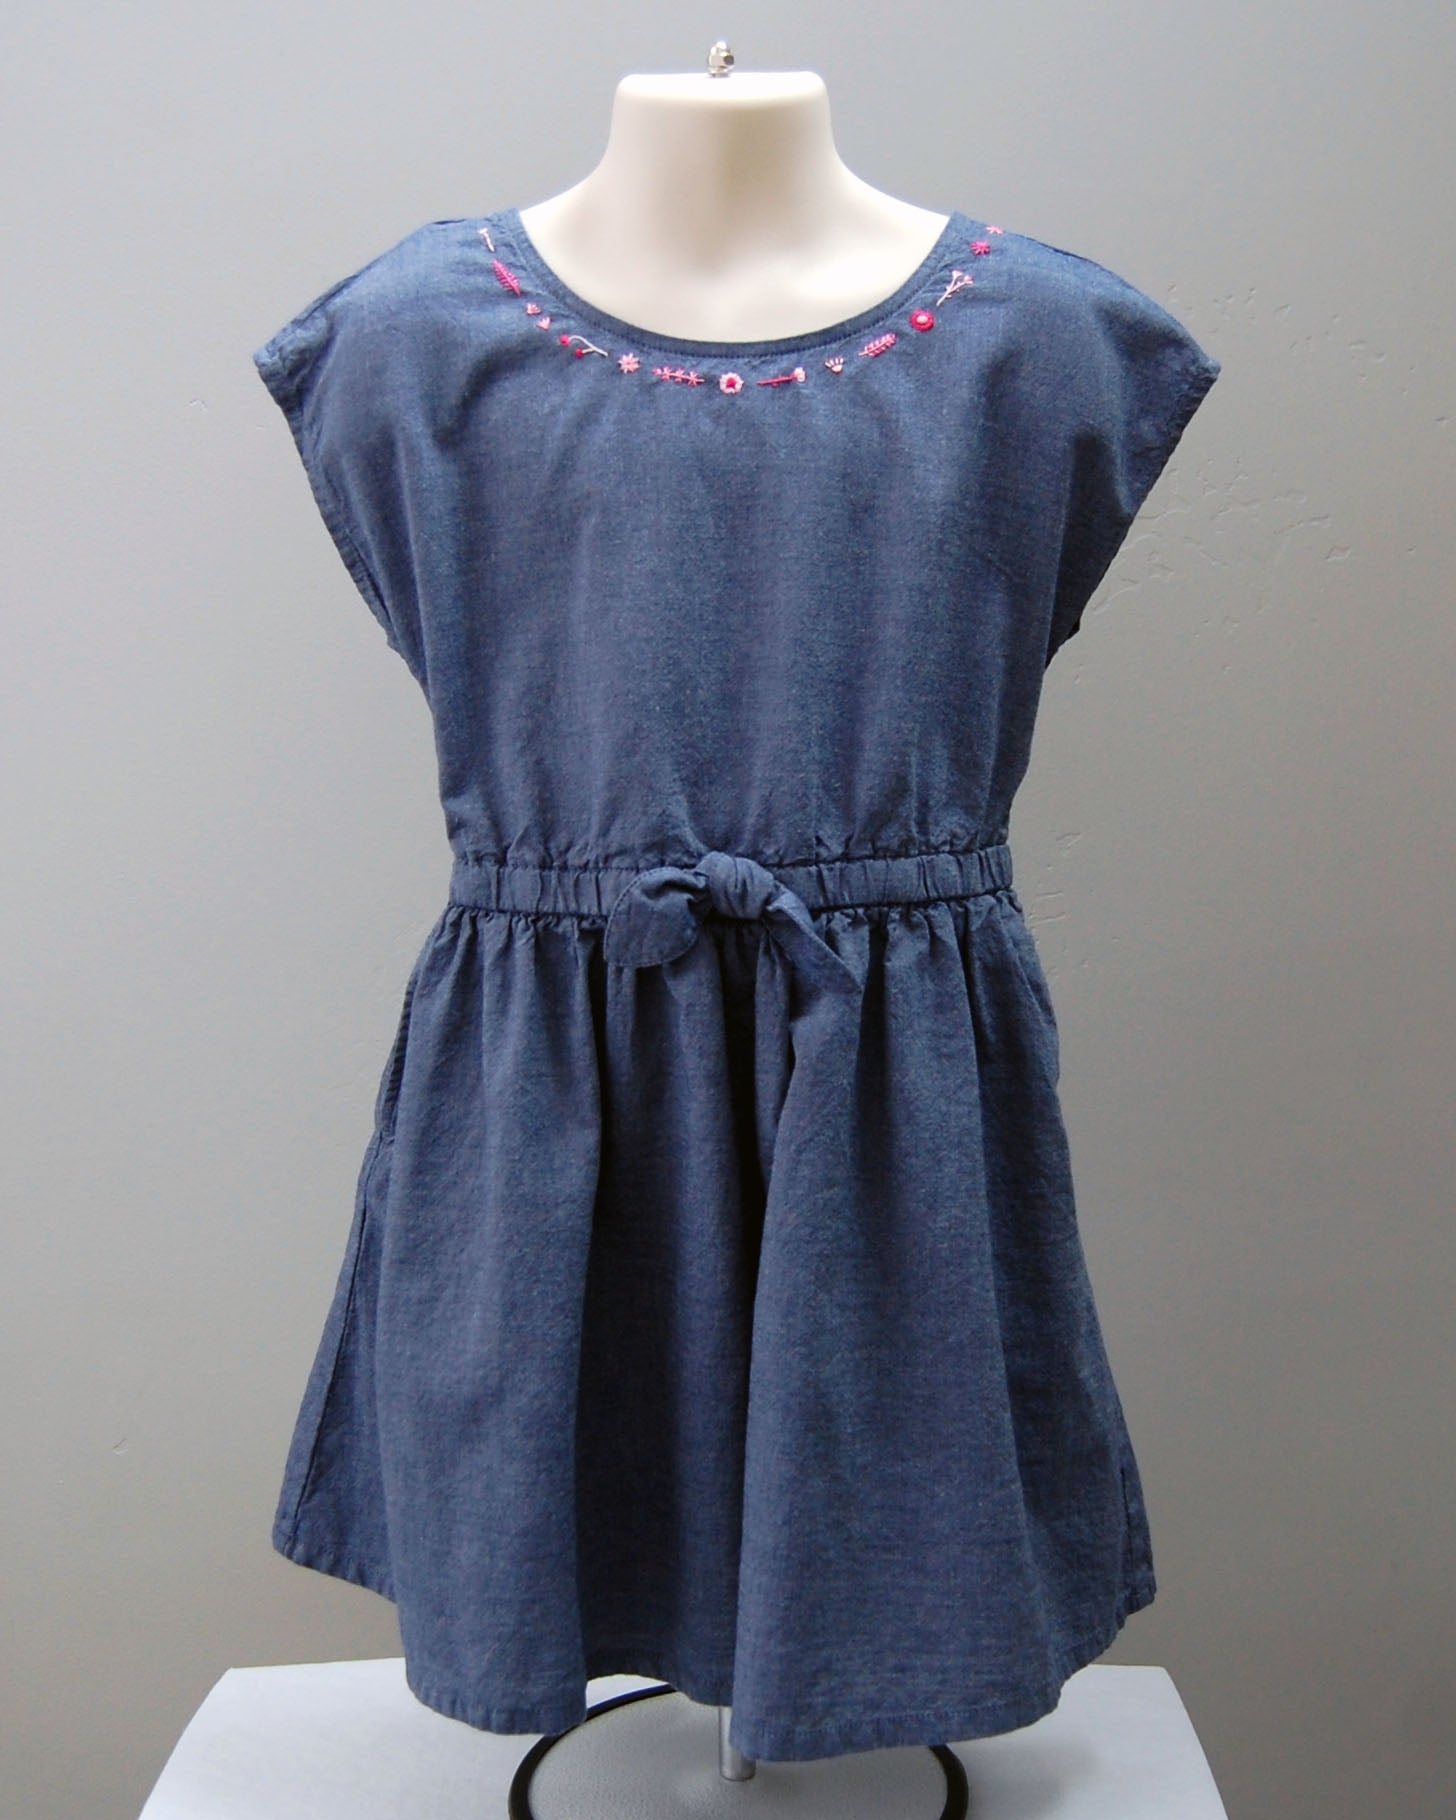 Girl's Embroidered Chambray Dress Pink Flowers (Size 3T-4T)